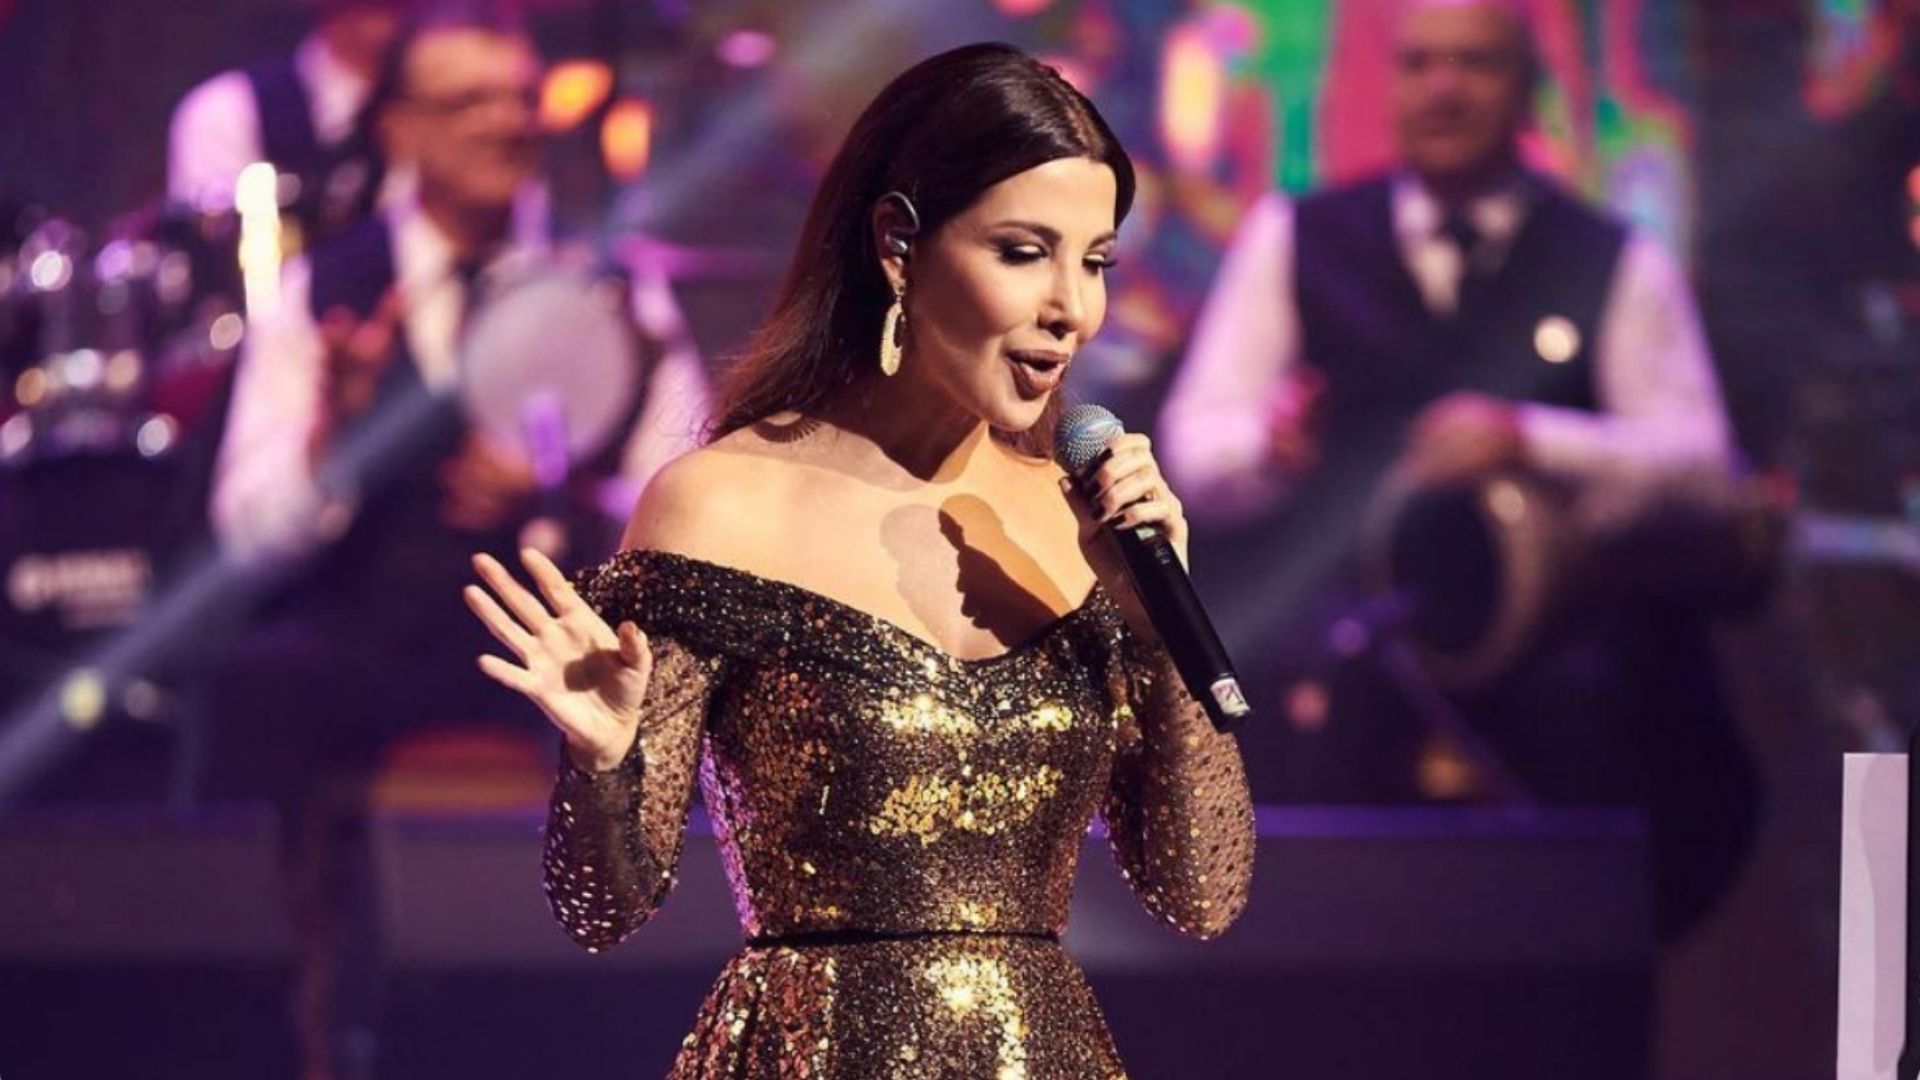 Nancy Ajram Tunisia 2021: The Star Goes Full Glam In A Sequin Gown